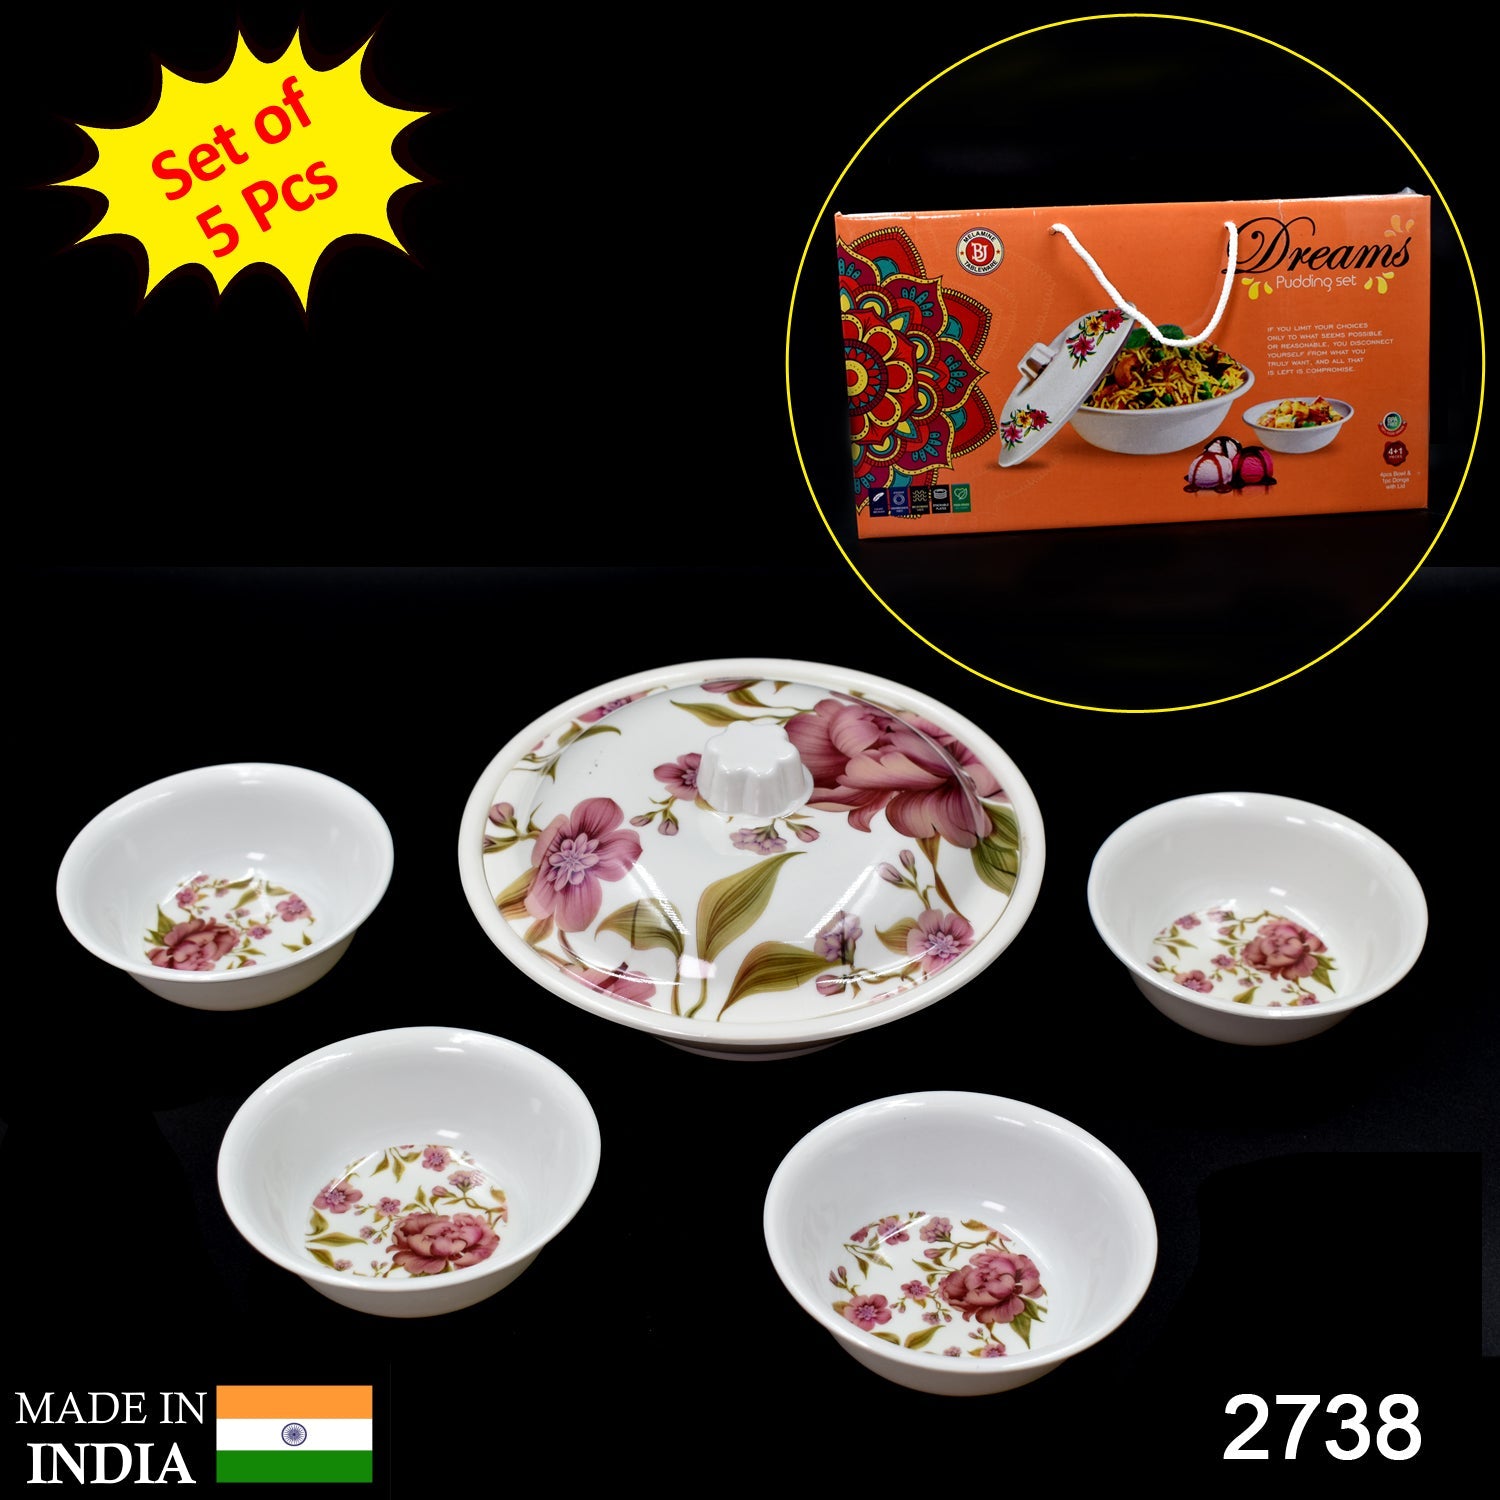 2738 5 Pc Pudding Set used as a cutlery set for serving food purposes and sweet dishes and all in all kinds of household and official places etc.